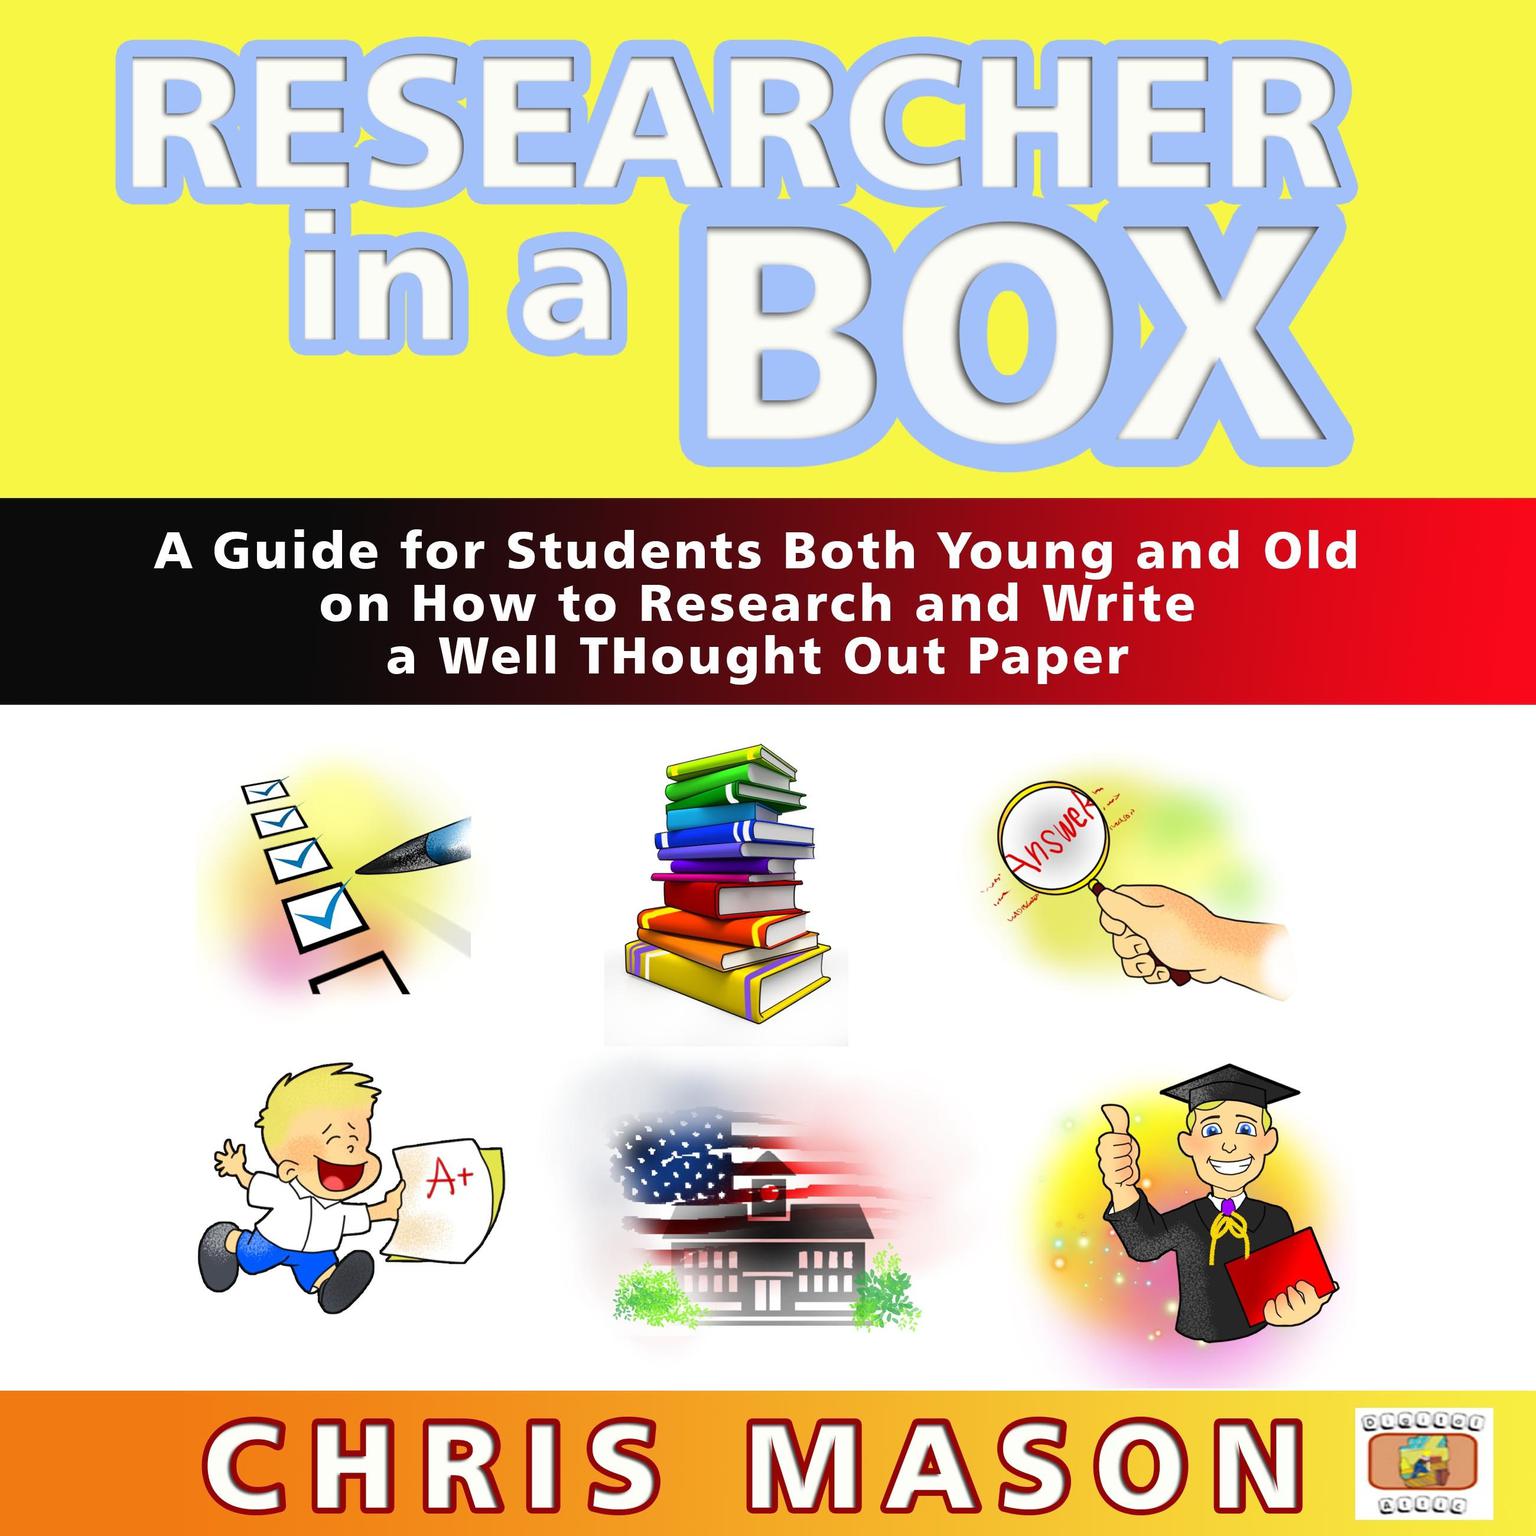 Researcher in a Box: A Guide for Students Both Young and Old on How to Research and Write a Well Thought Out Paper Audiobook, by Chris Mason